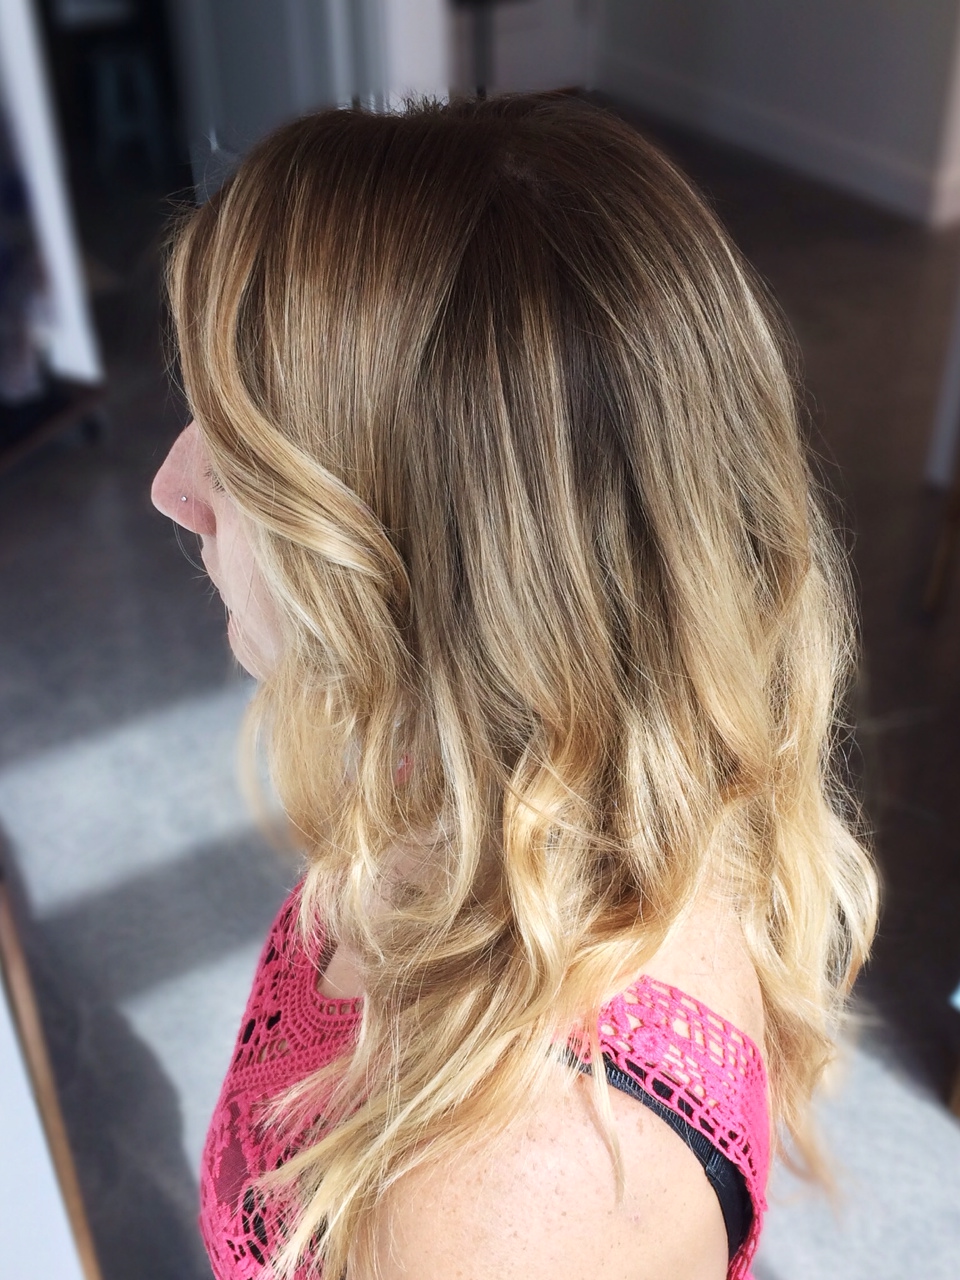  highlights done with hair painting, a form of balayage, at Elle 7 Twenty Salon and Spa, a Vero Beach hair salon. 